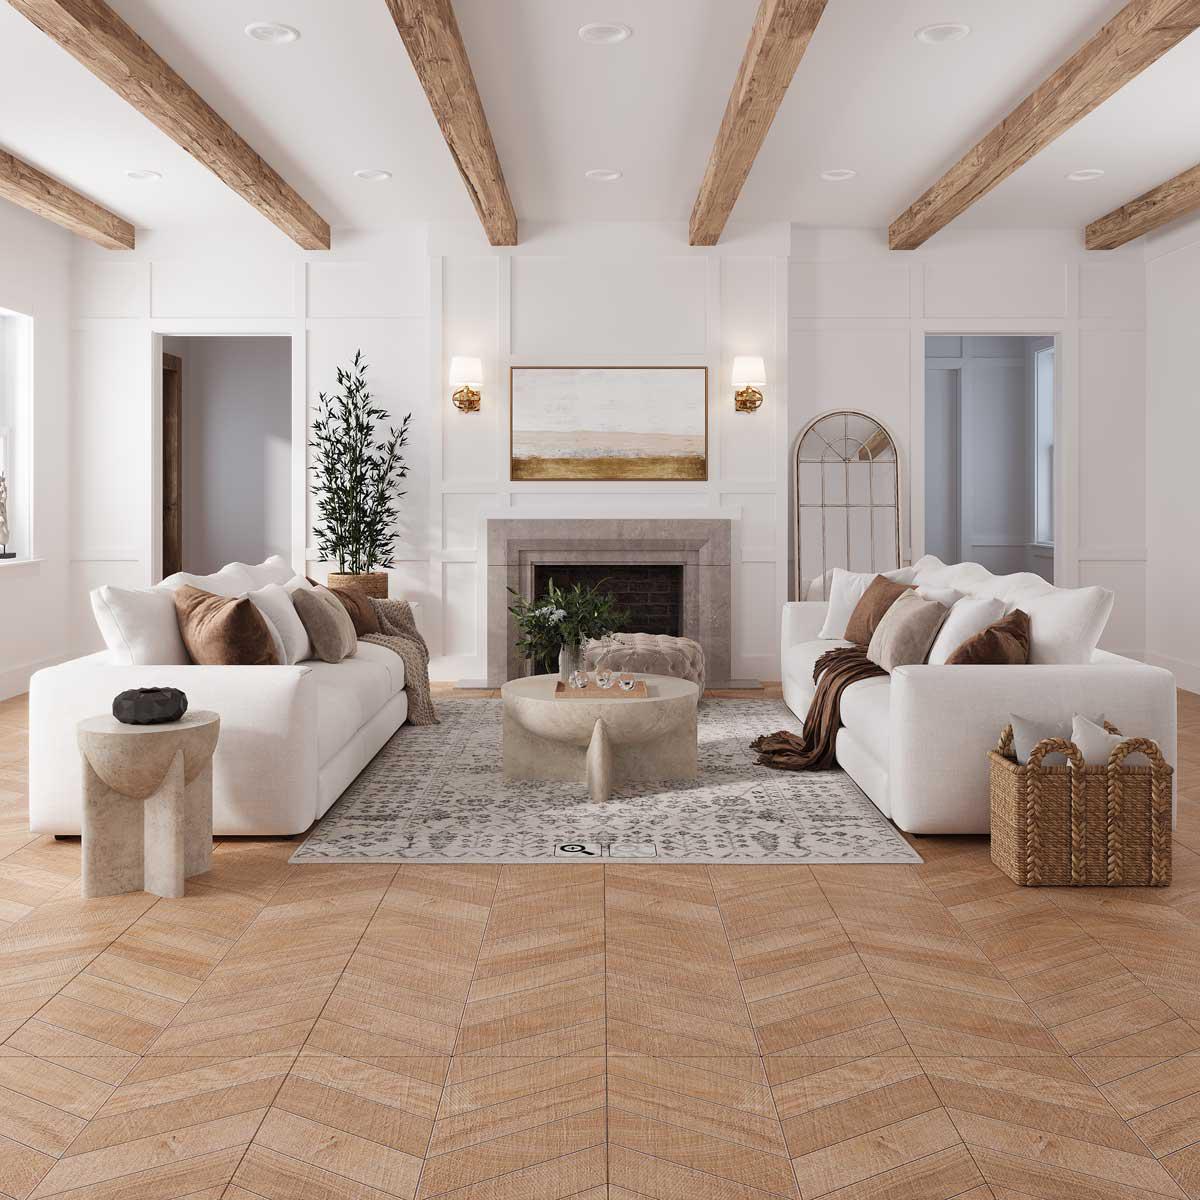 California casual living room in white and wood with chevron floor tiles